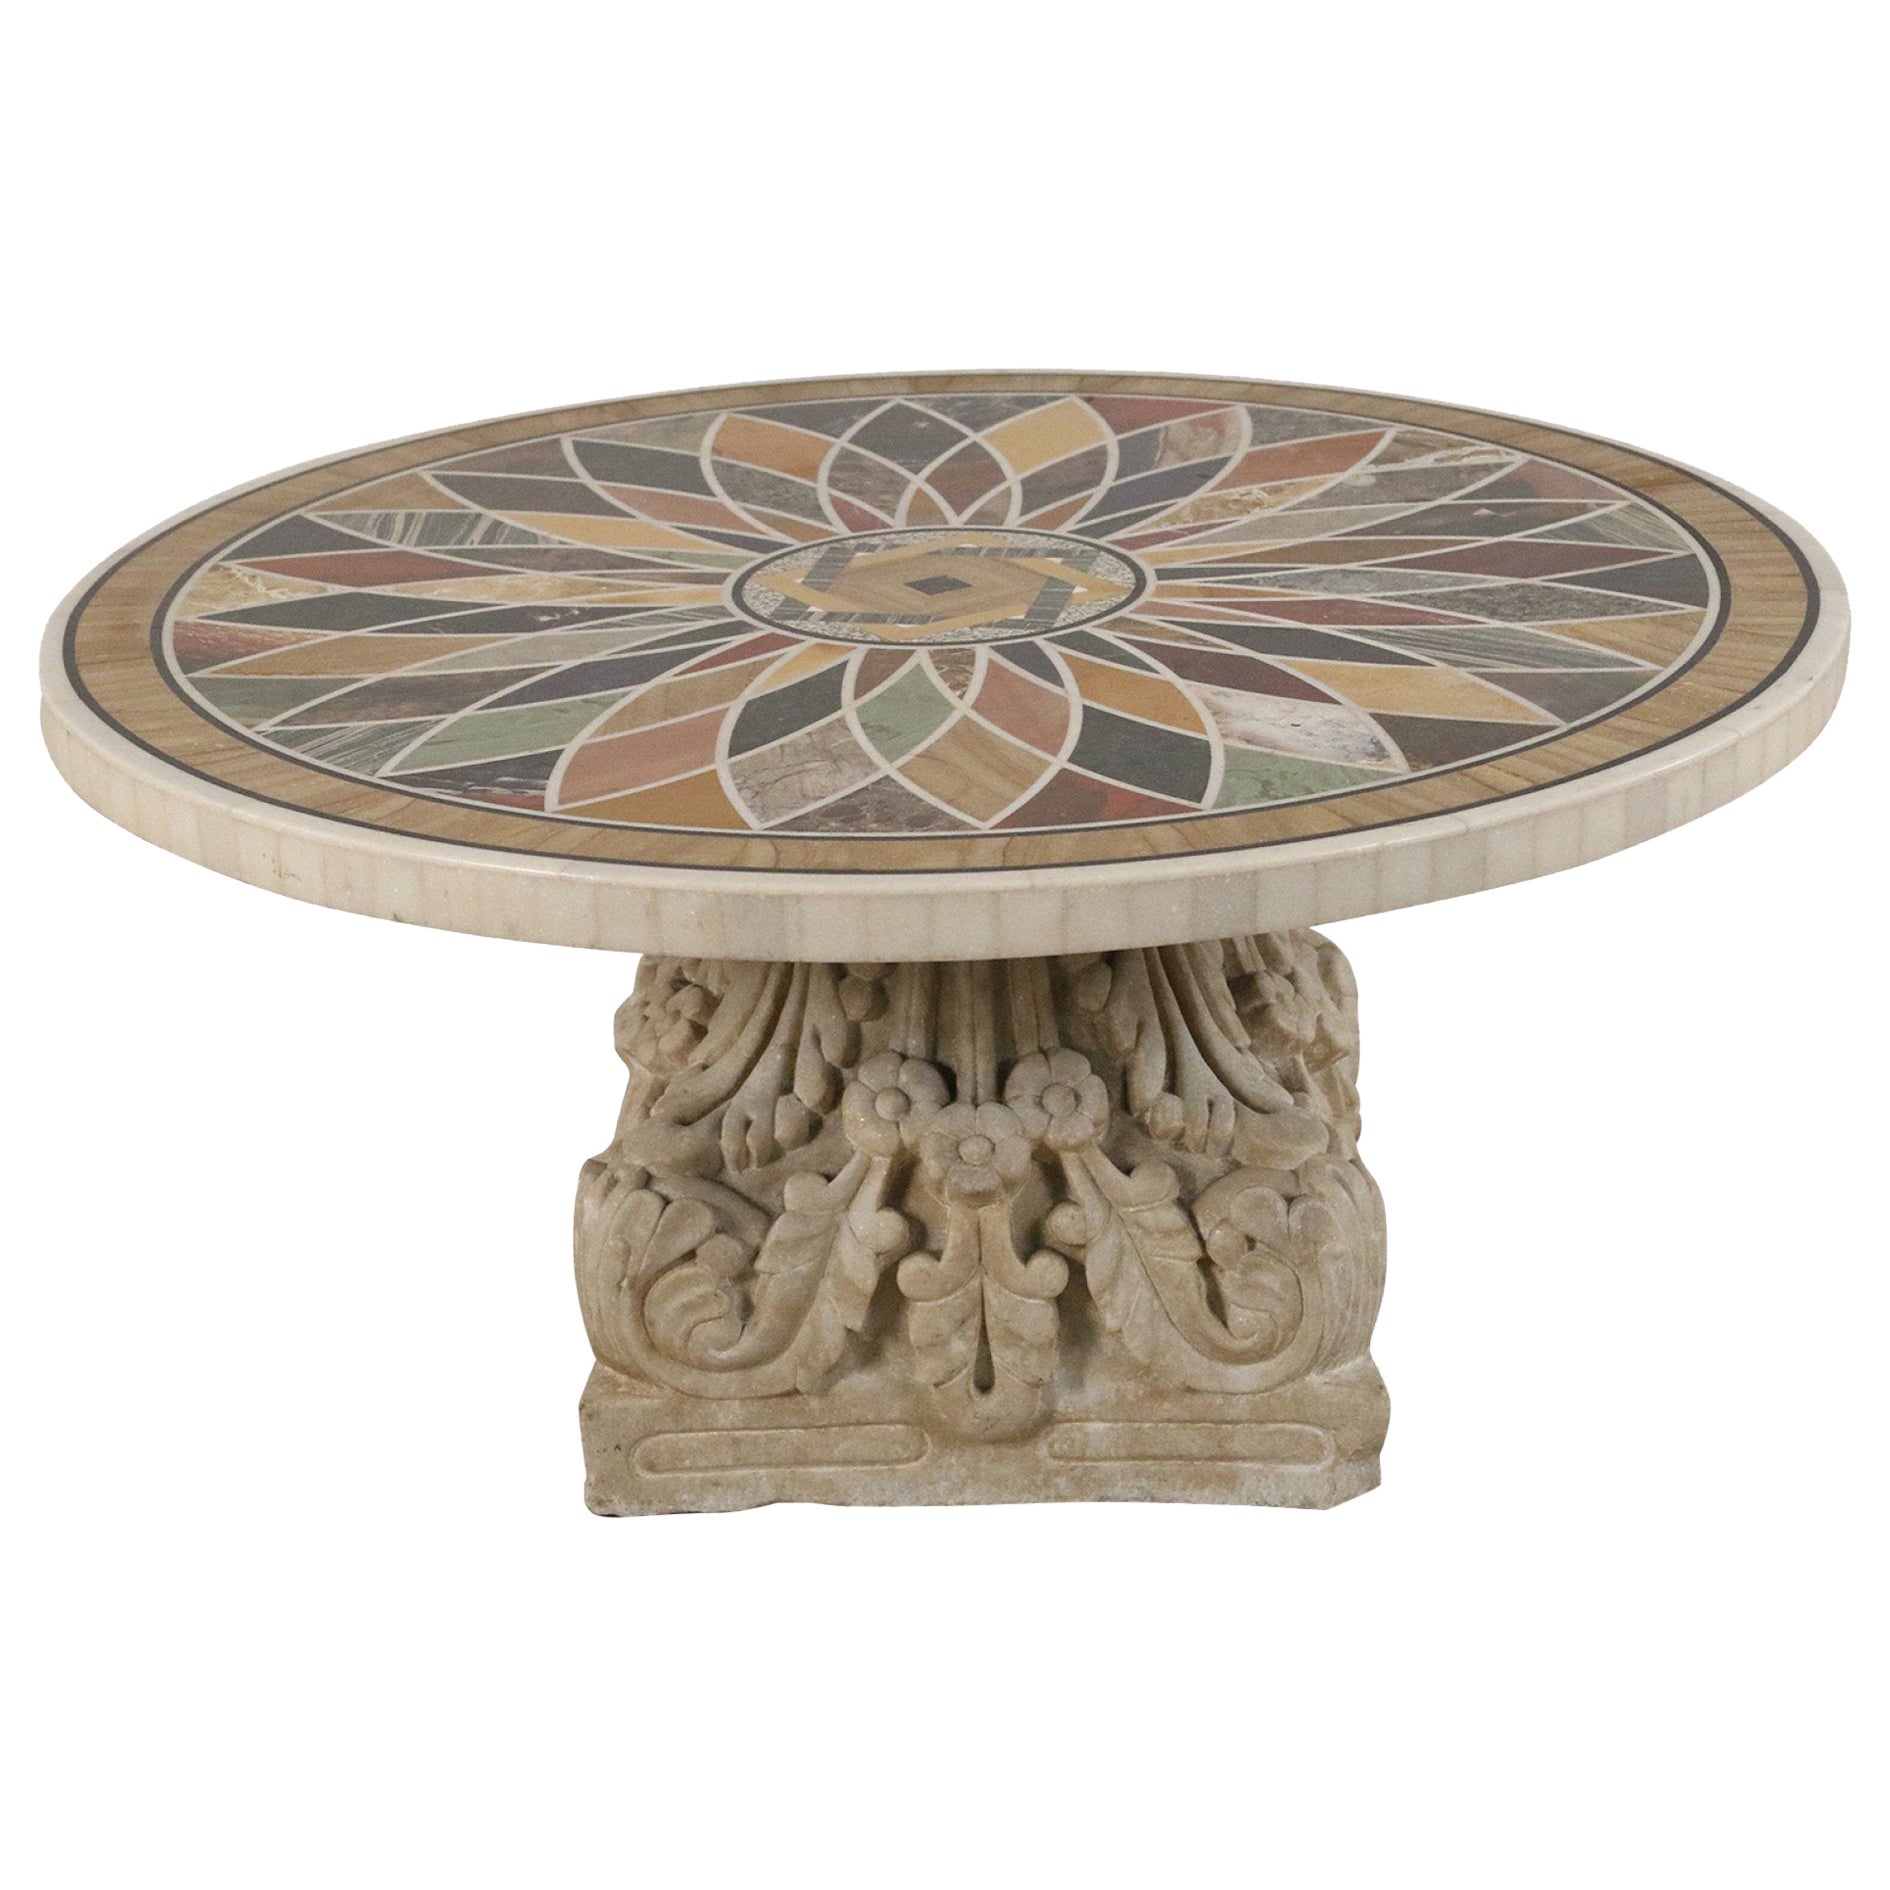 Italian Neo-Classic Marble Inlaid Top and Acanthus Leaf Design Base Coffee Table For Sale